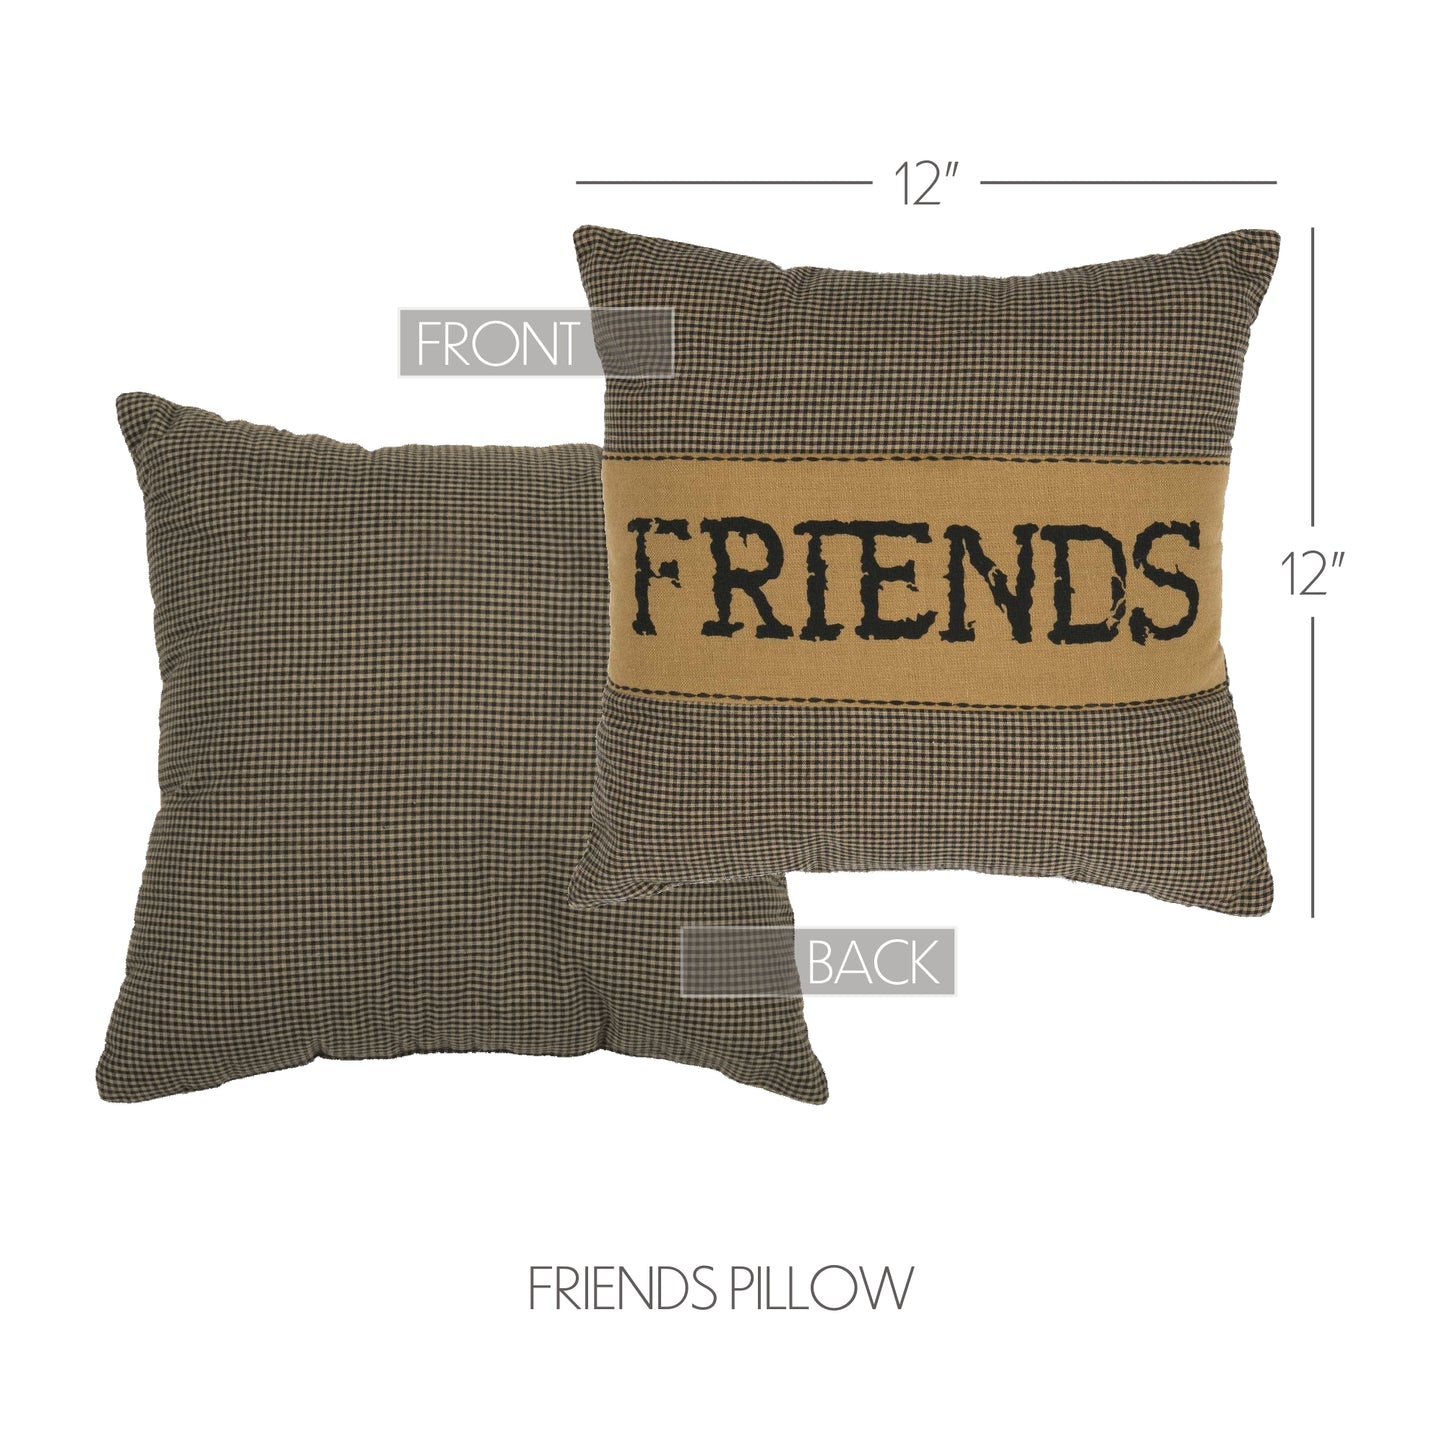 34238-Heritage-Farms-Friends-Pillow-12x12-image-1